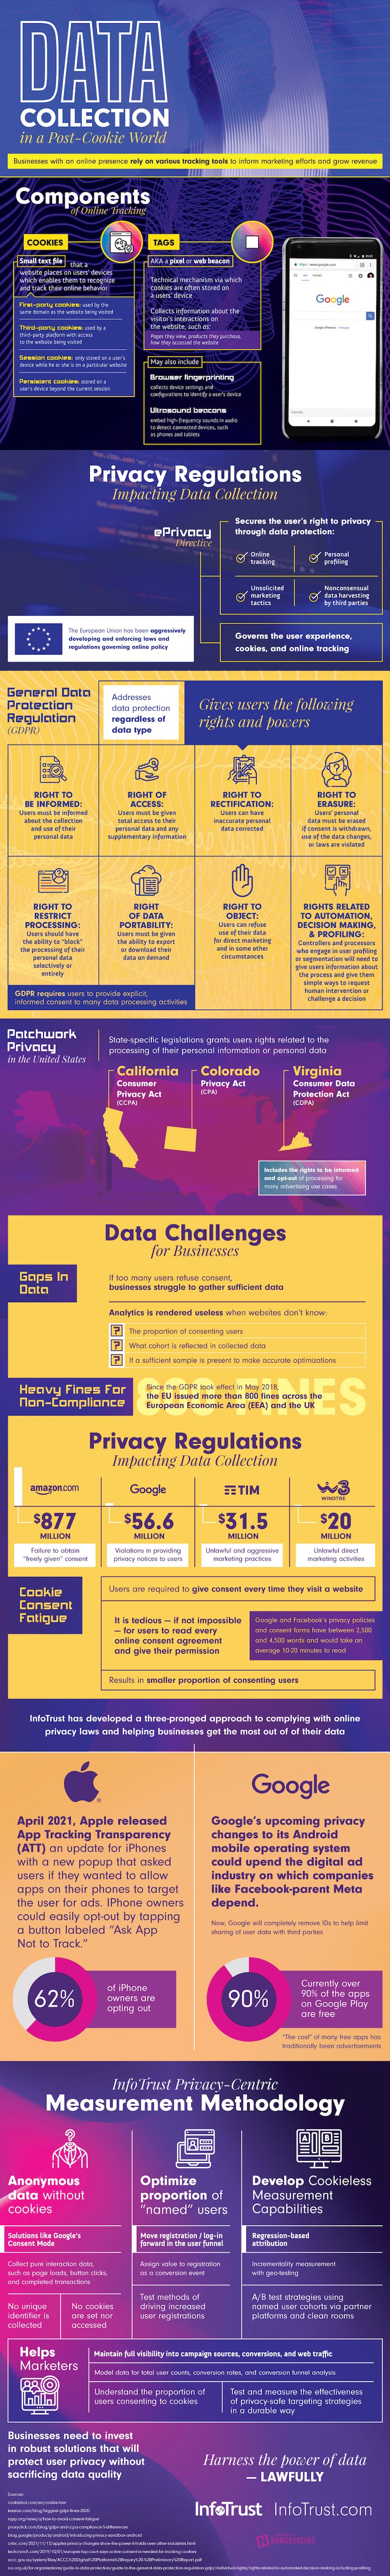 Data collection in a post-cookie world infographic